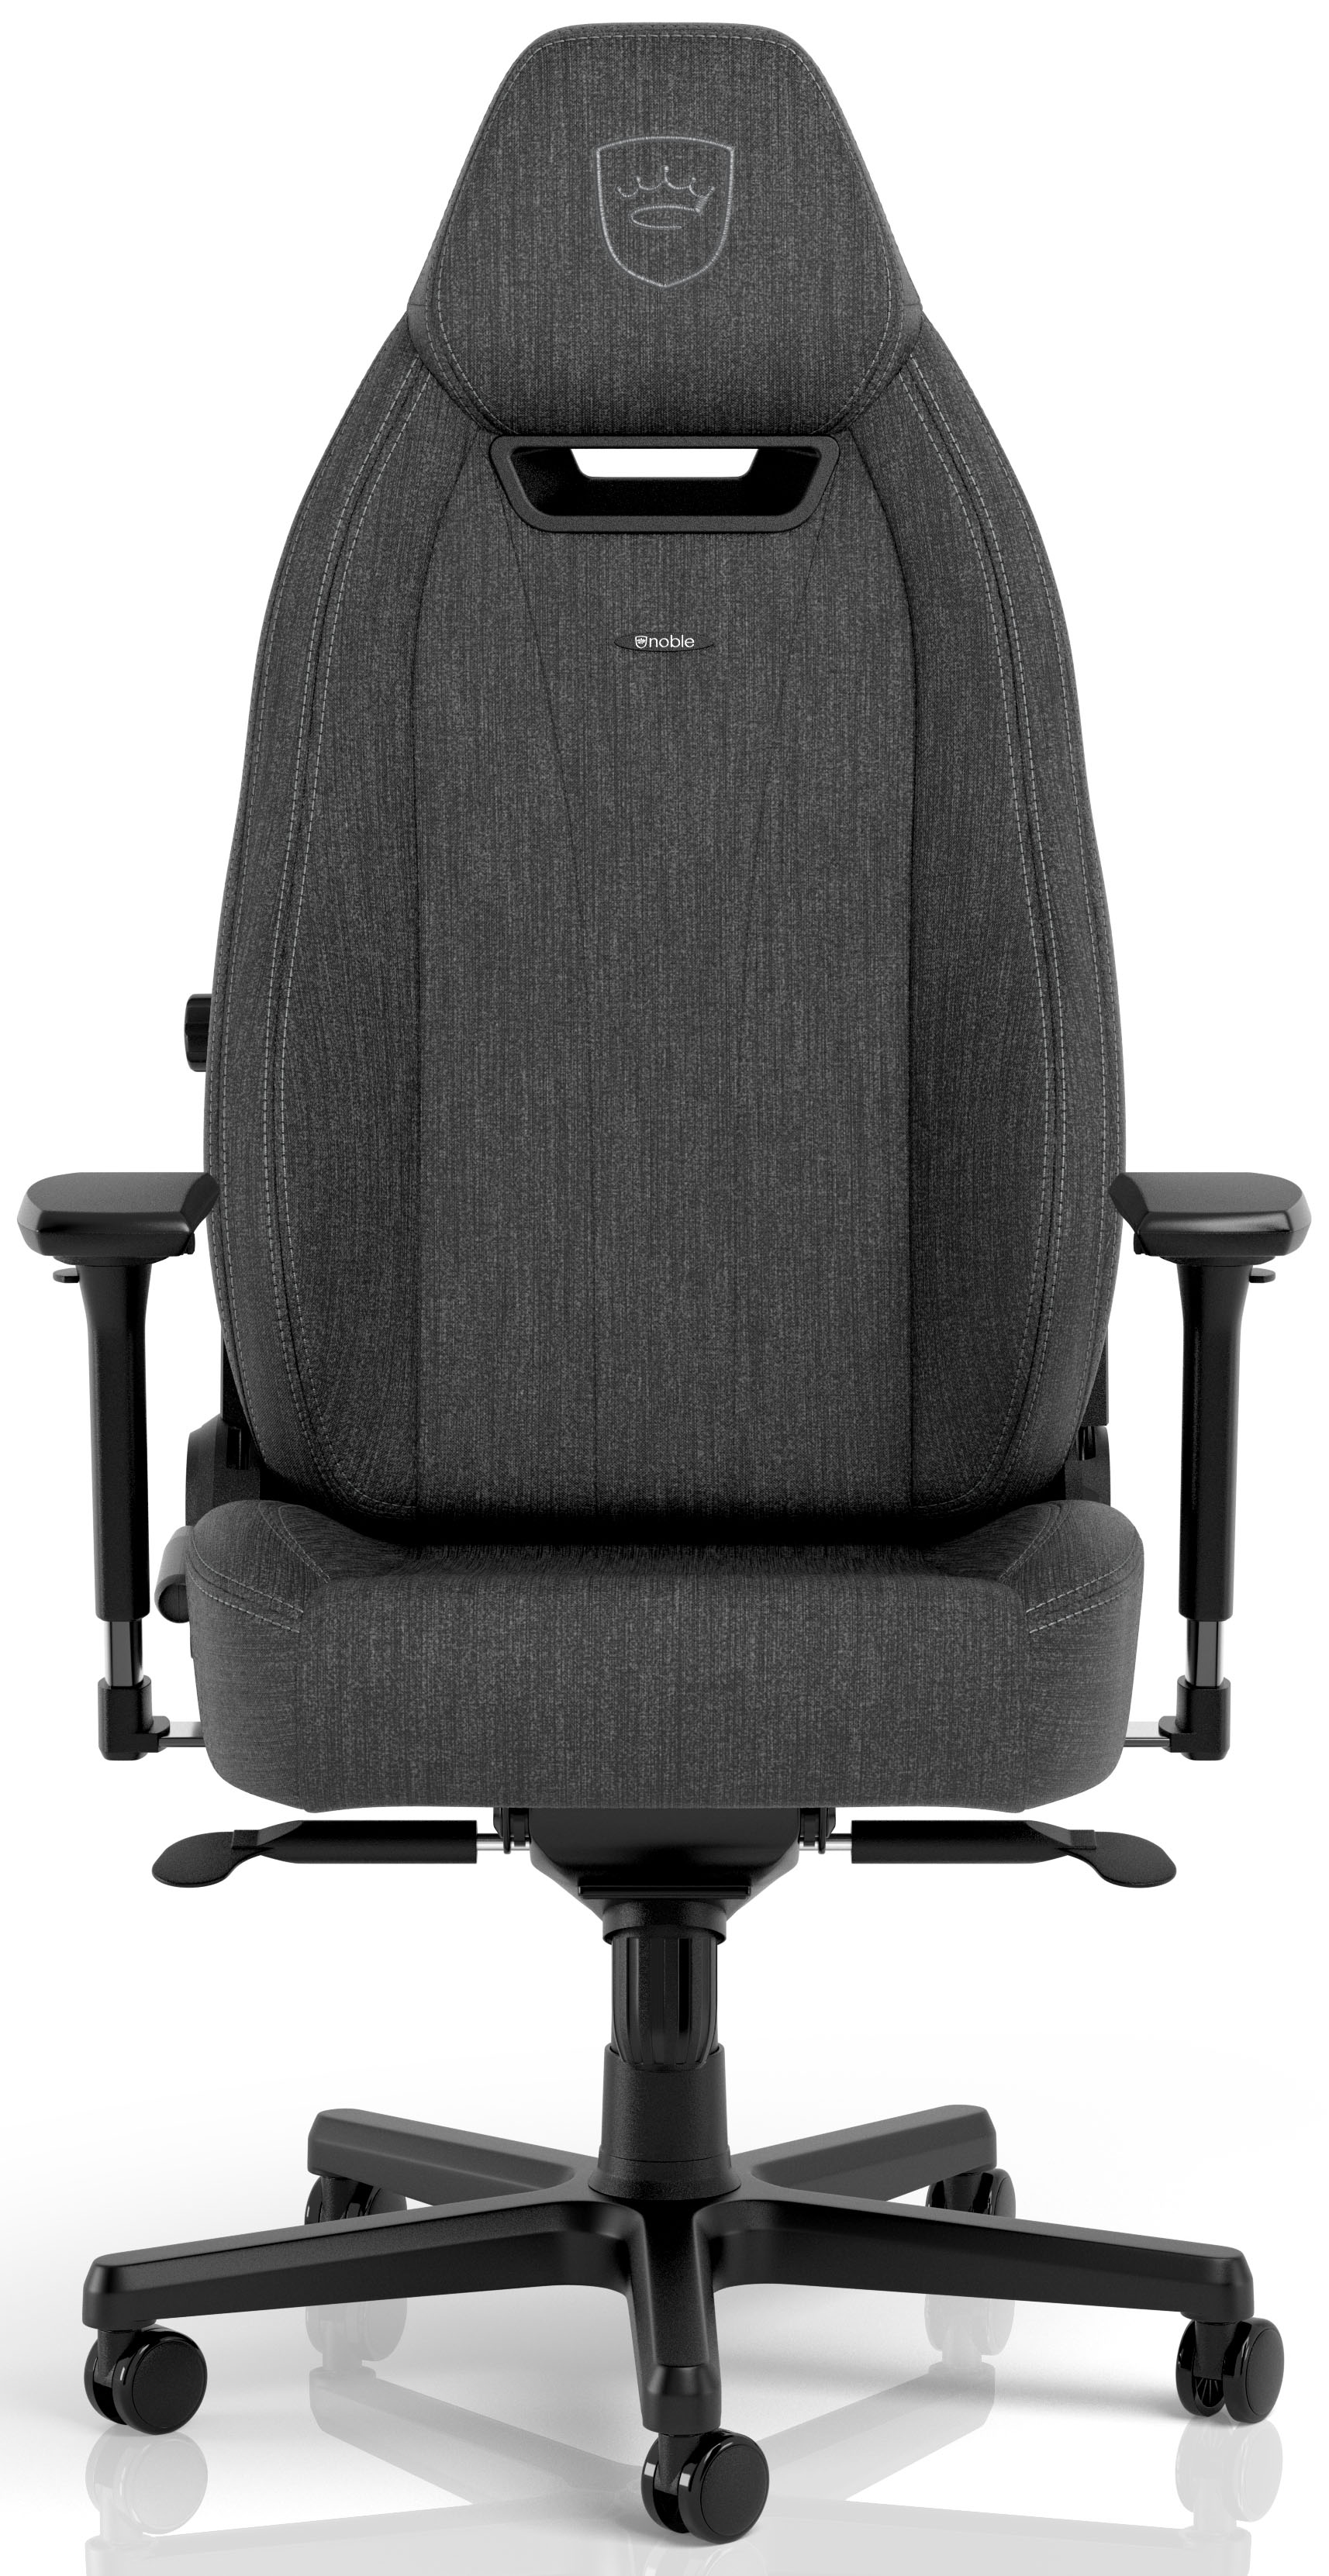 noblechairs - ** B Grade ** Silla noblechairs LEGEND TX - Fabric Edition Anthracite